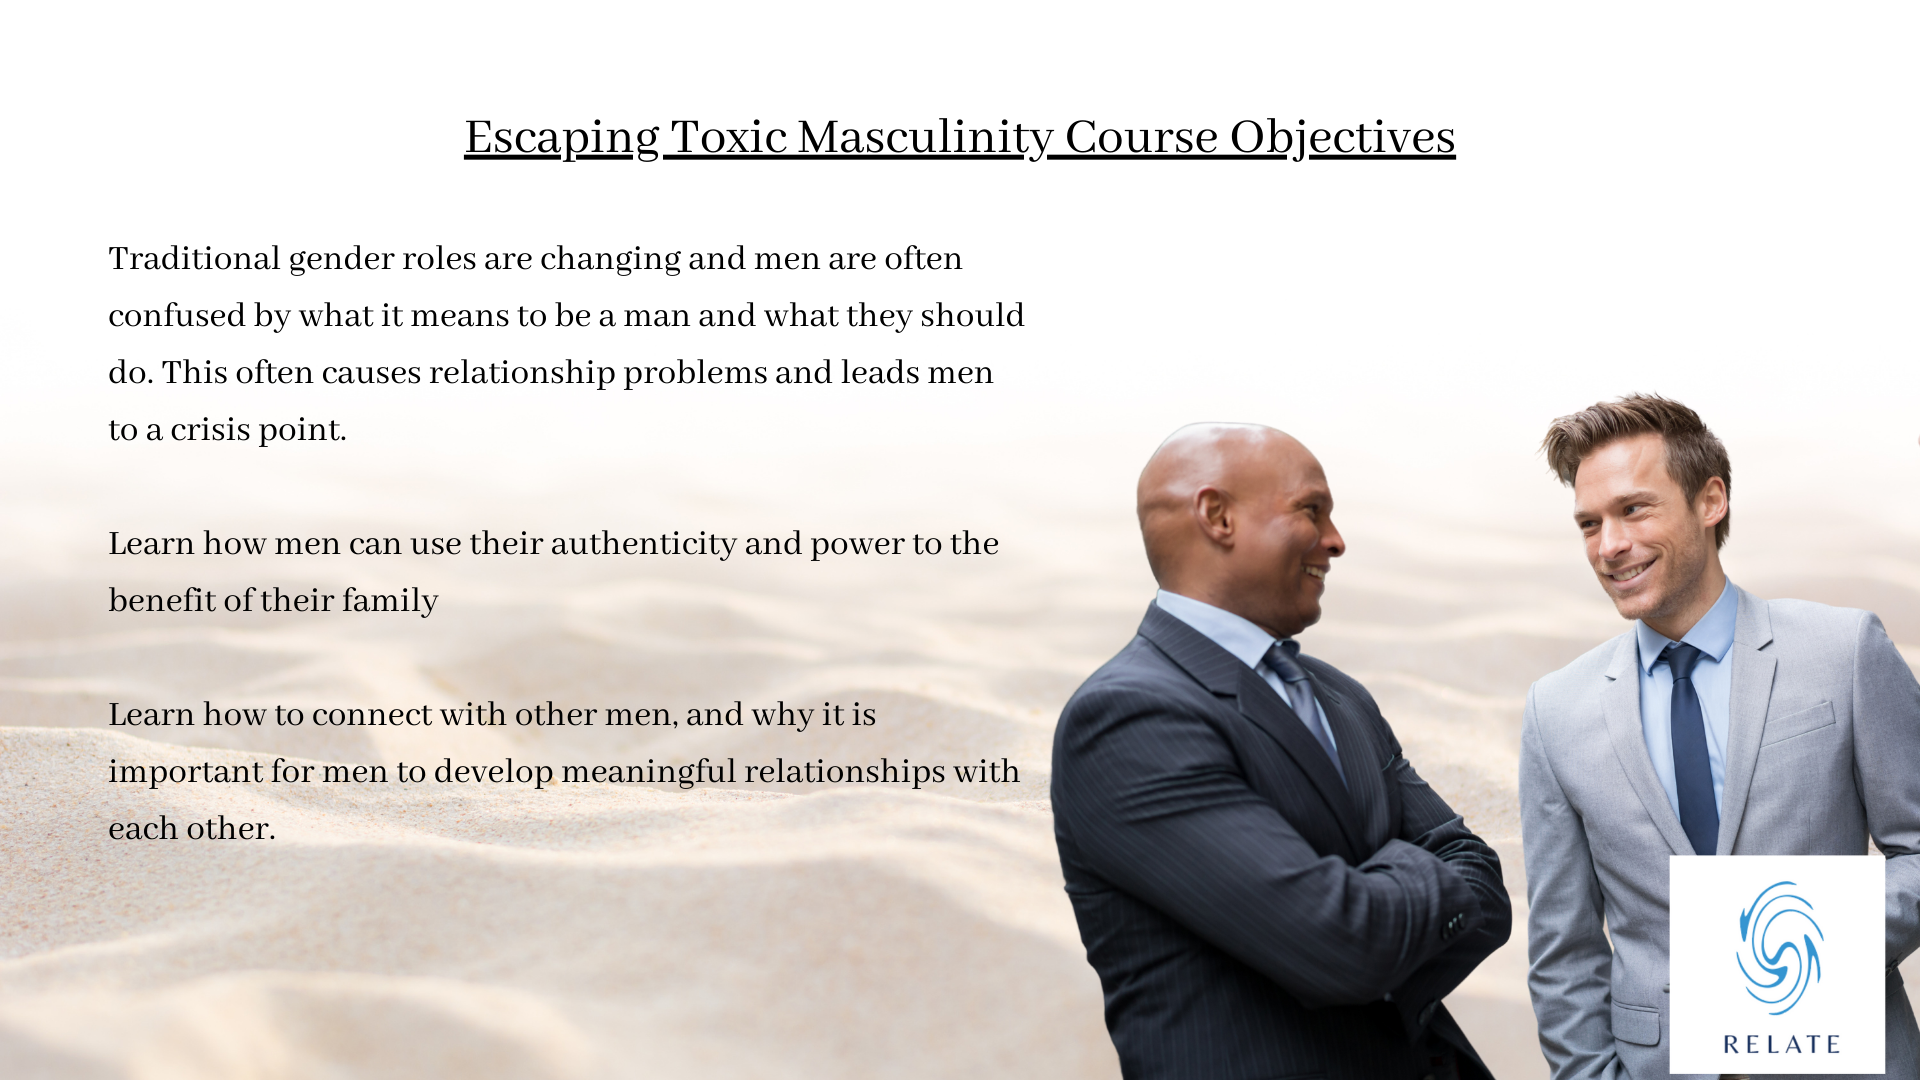 Escaping Toxic Masculinity